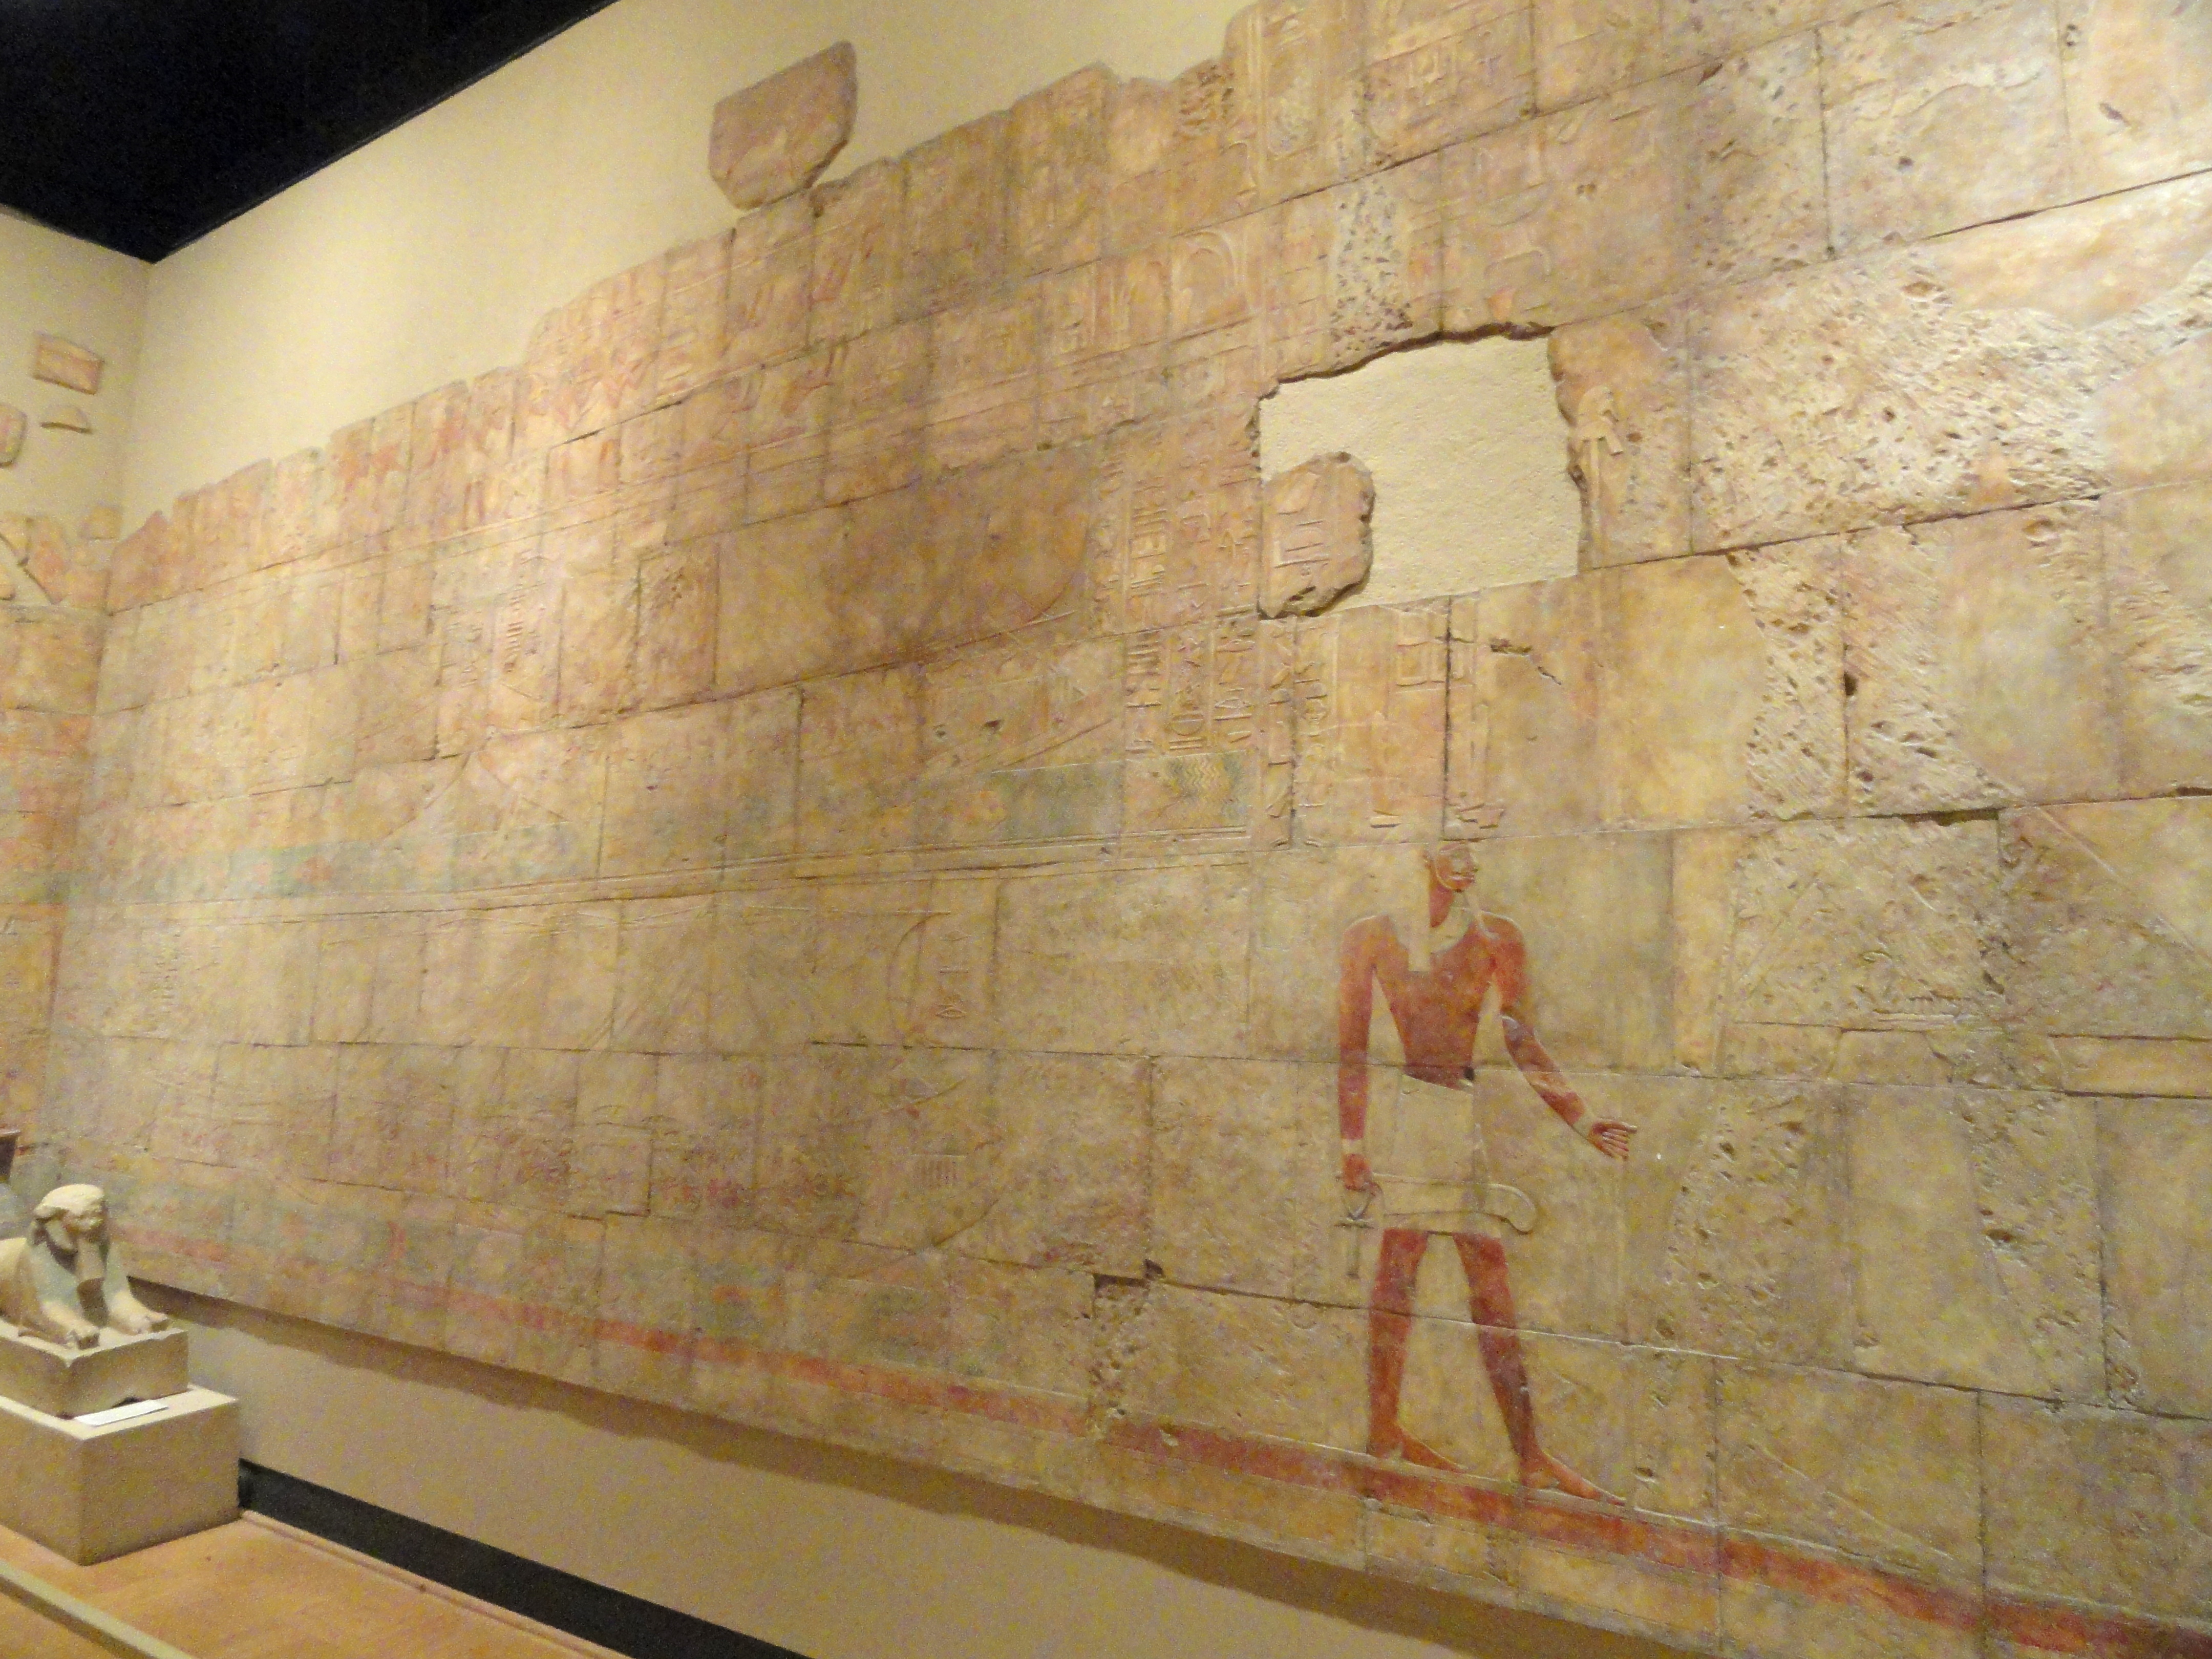 A partially-vandalized temple wall showing Queen Hatshepsut’s voyage to Punt. A small sphinx with Hatshepsut’s face sits in the lower left corner.